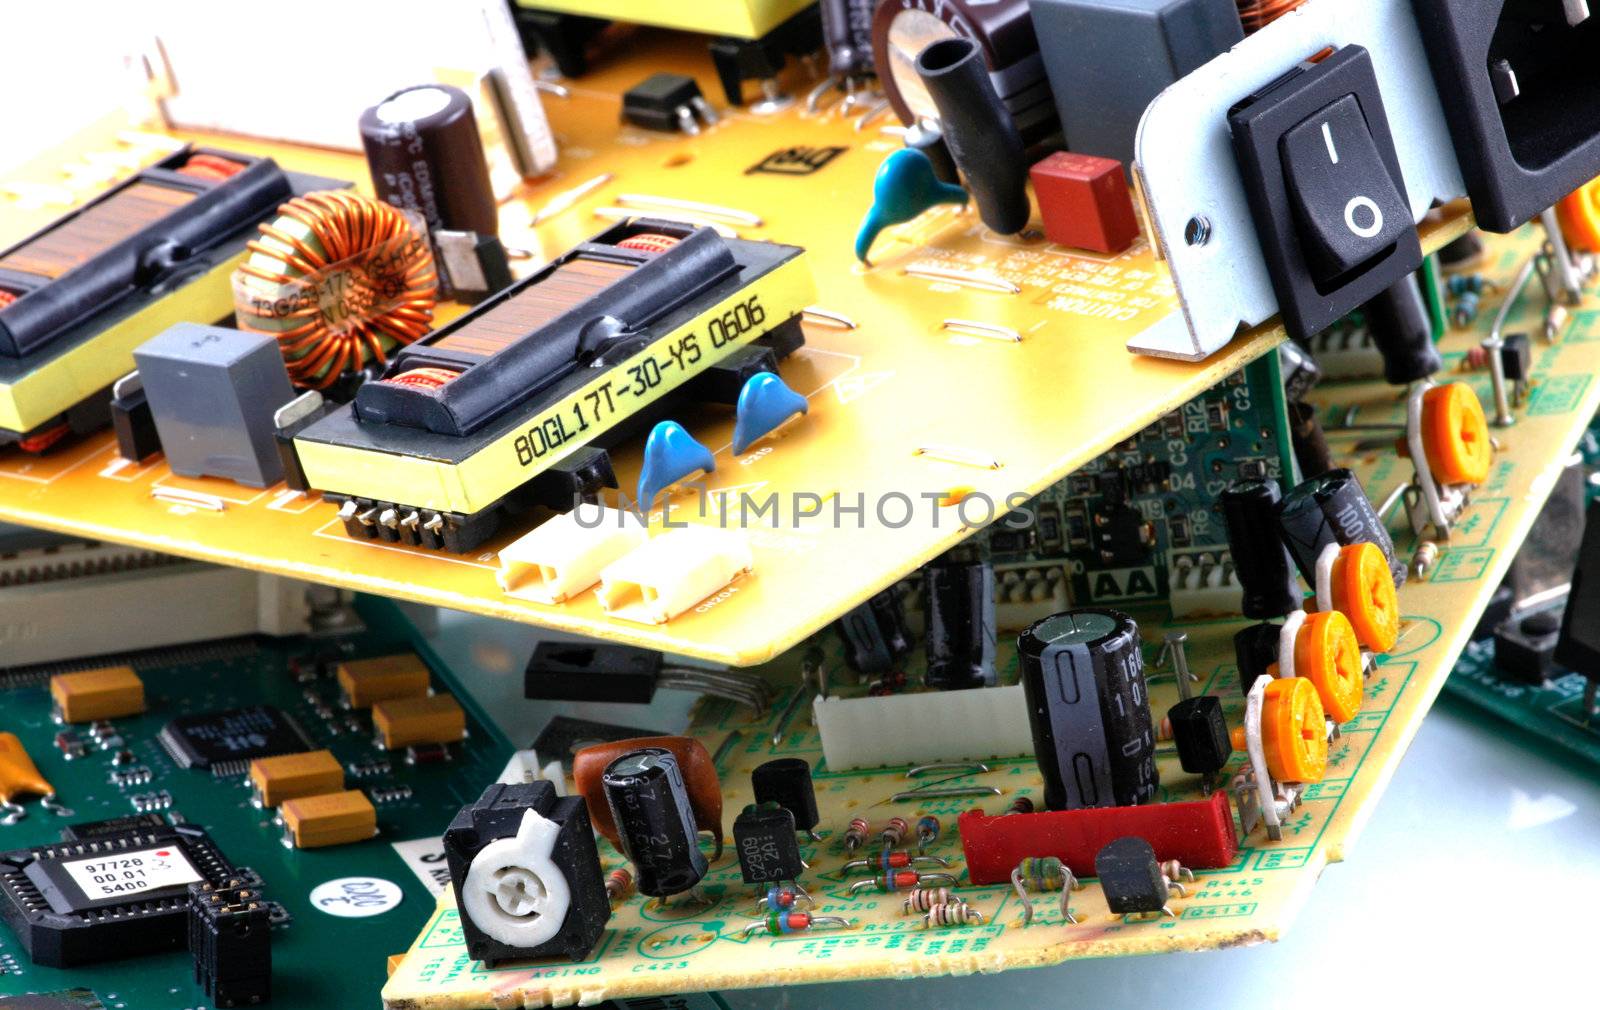 Image of computer hardware & components by nenov